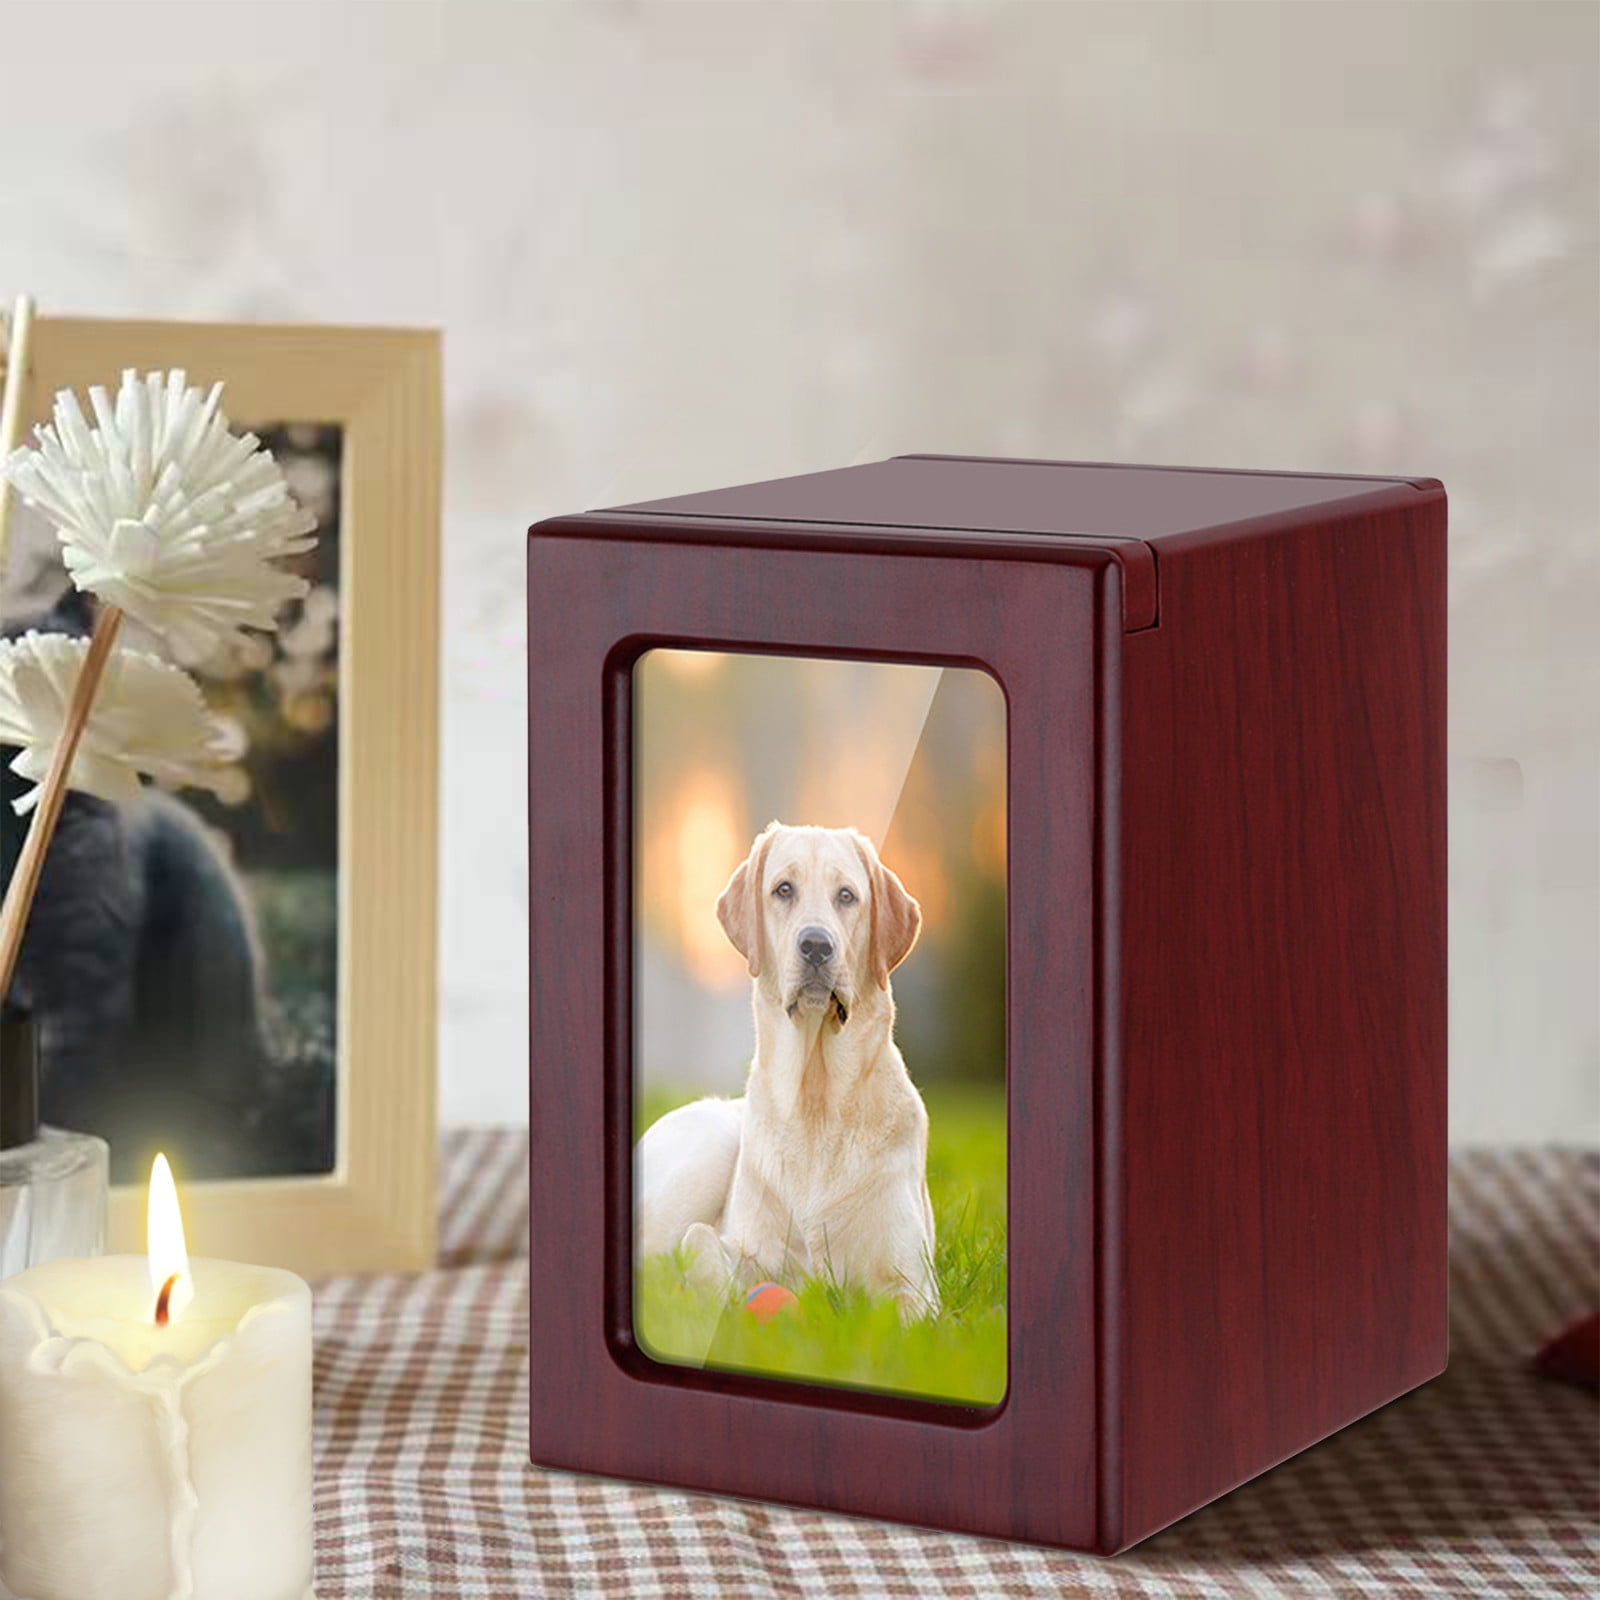 VIAFLY Photo Frame Wood Memorial Pet Urn-Pet Cremation Box,pet Urns, Holds  Up To 30 Cubi-c Inches Of Ashes - Cremation Urn For Cat, Dog61 